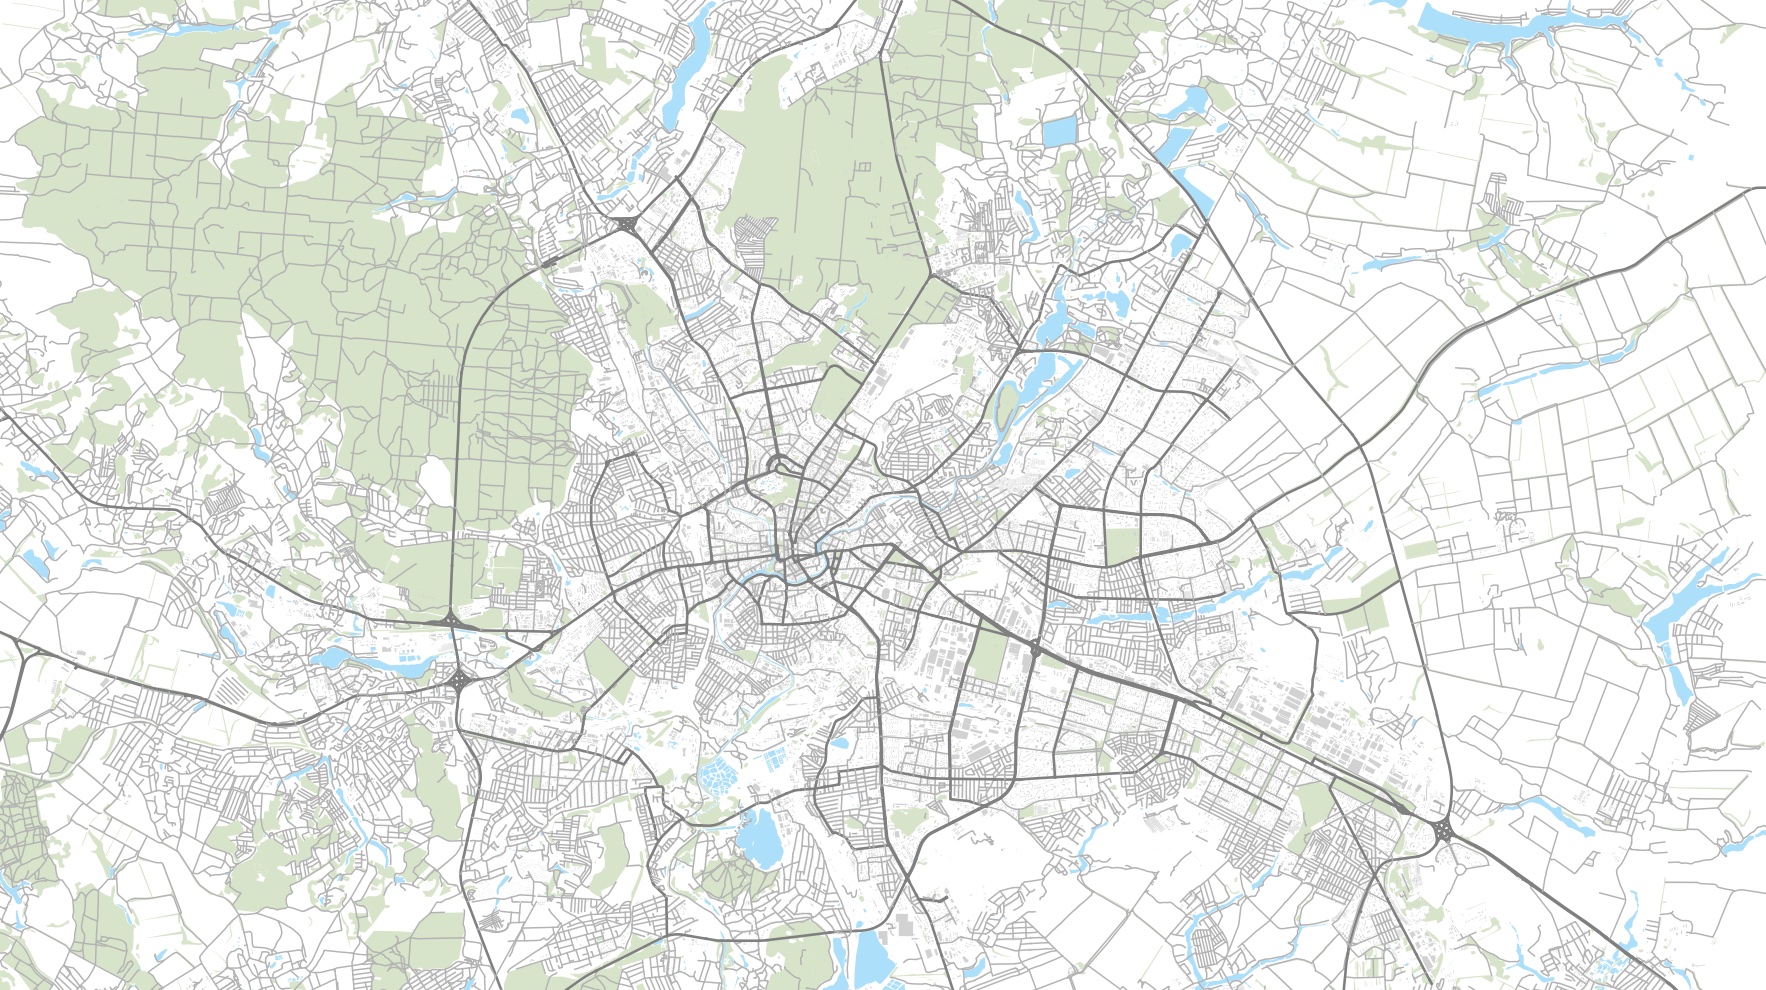 OSM-based version of the same map